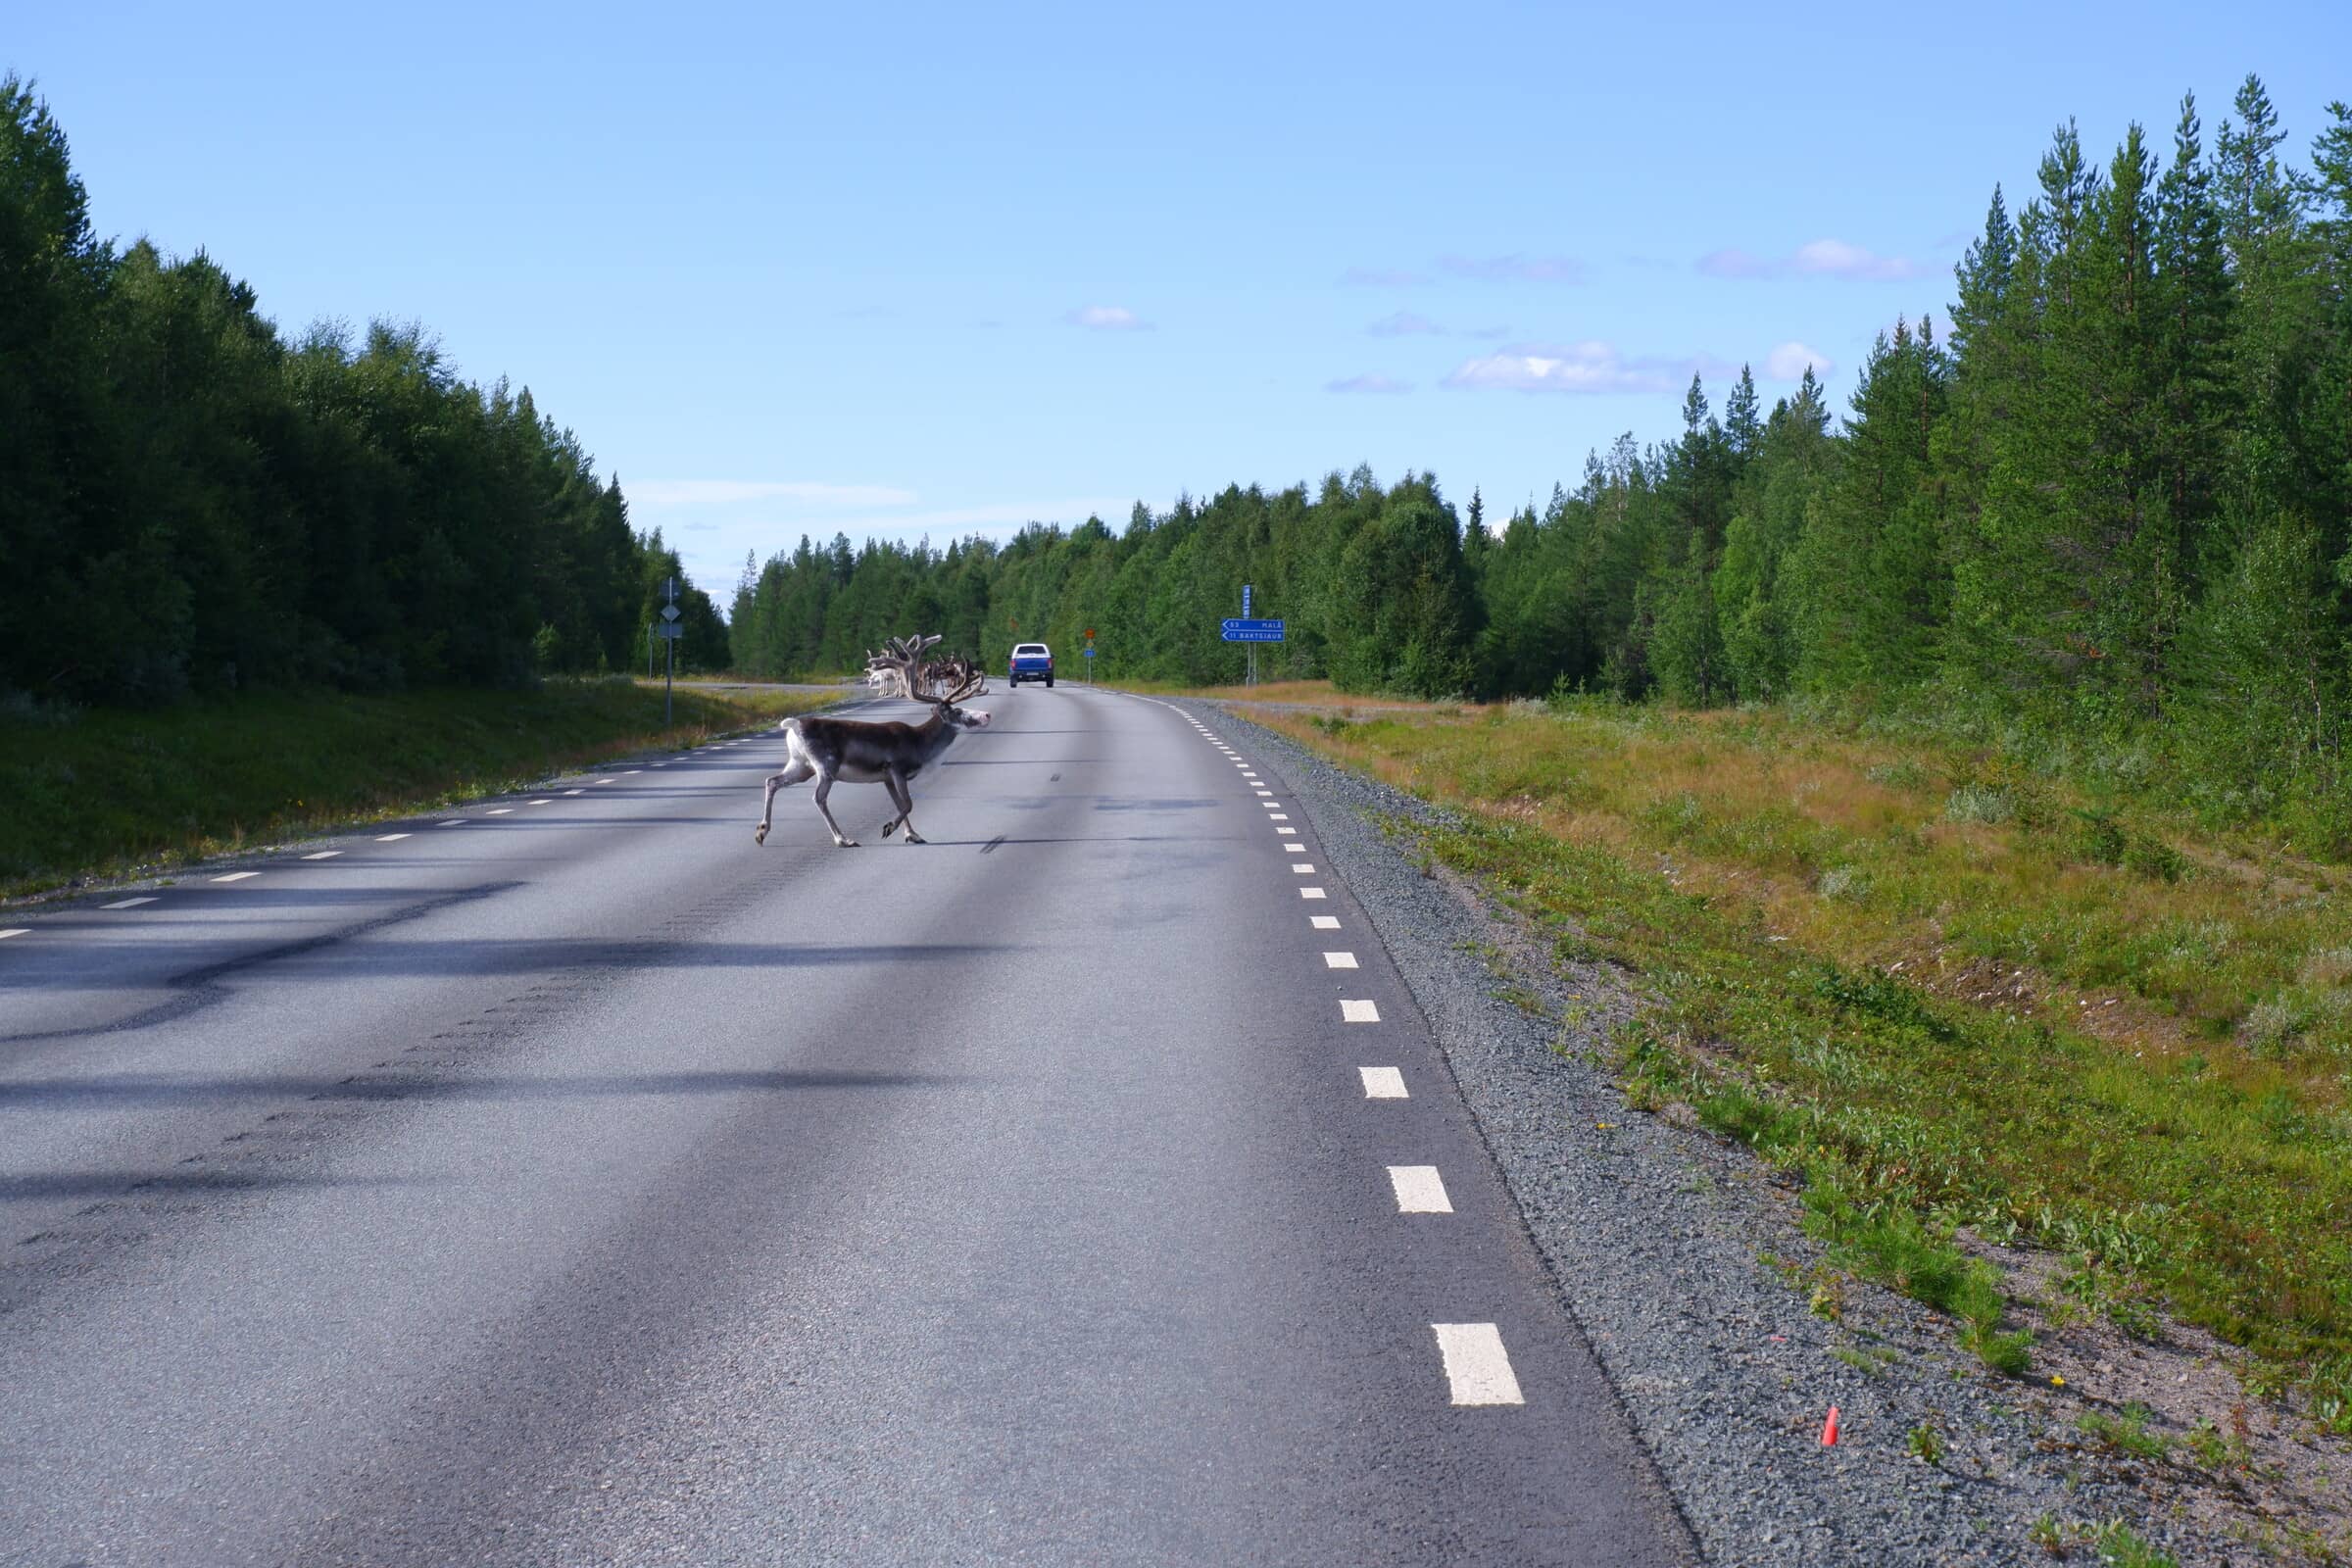 A herd of reindeer completely ignoring a passing car, but a couple reindeer closer to me that are running away like crazy. Almost looks like theyre stumbling.